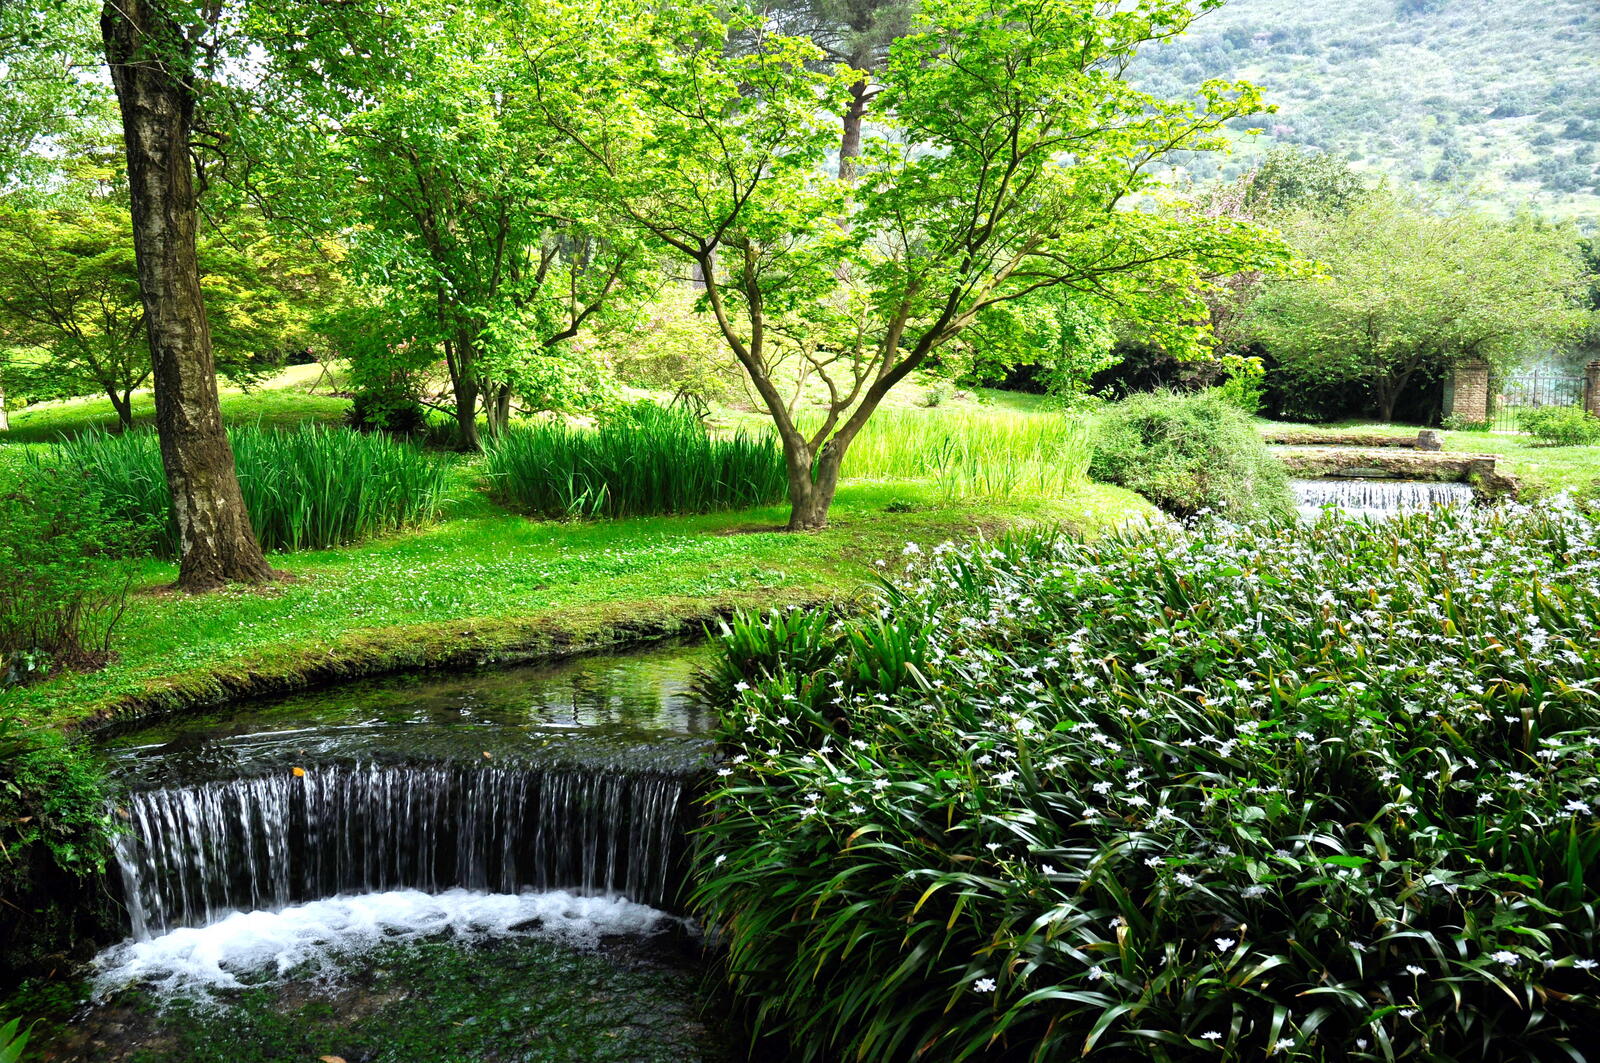 Wallpapers Ninfa is a landscape garden in the Cisterna di Latina in the province of Latina on the desktop